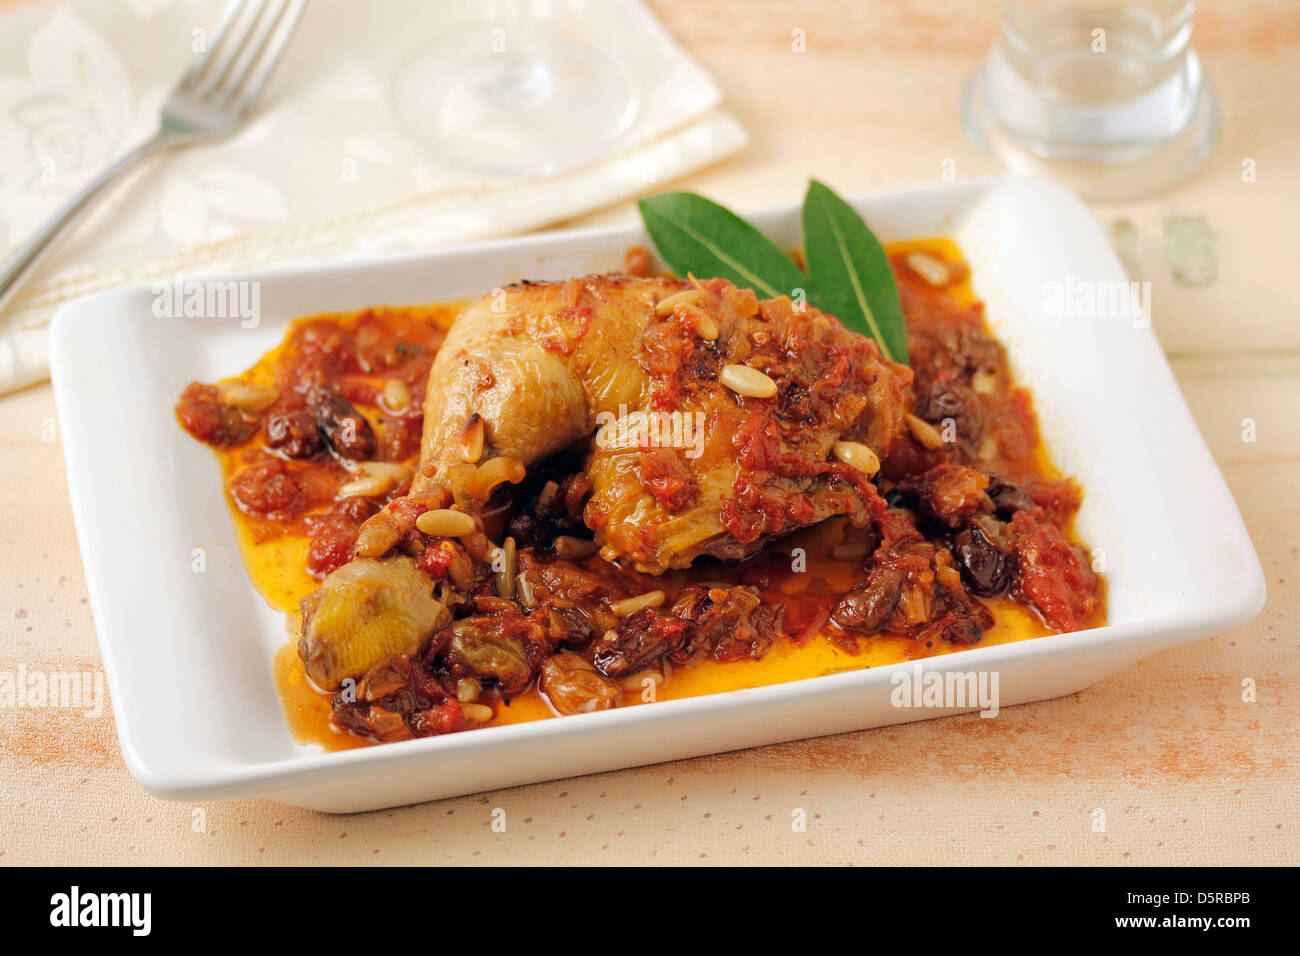 Chicken with raisins and pine nuts. Recipe available. Stock Photo